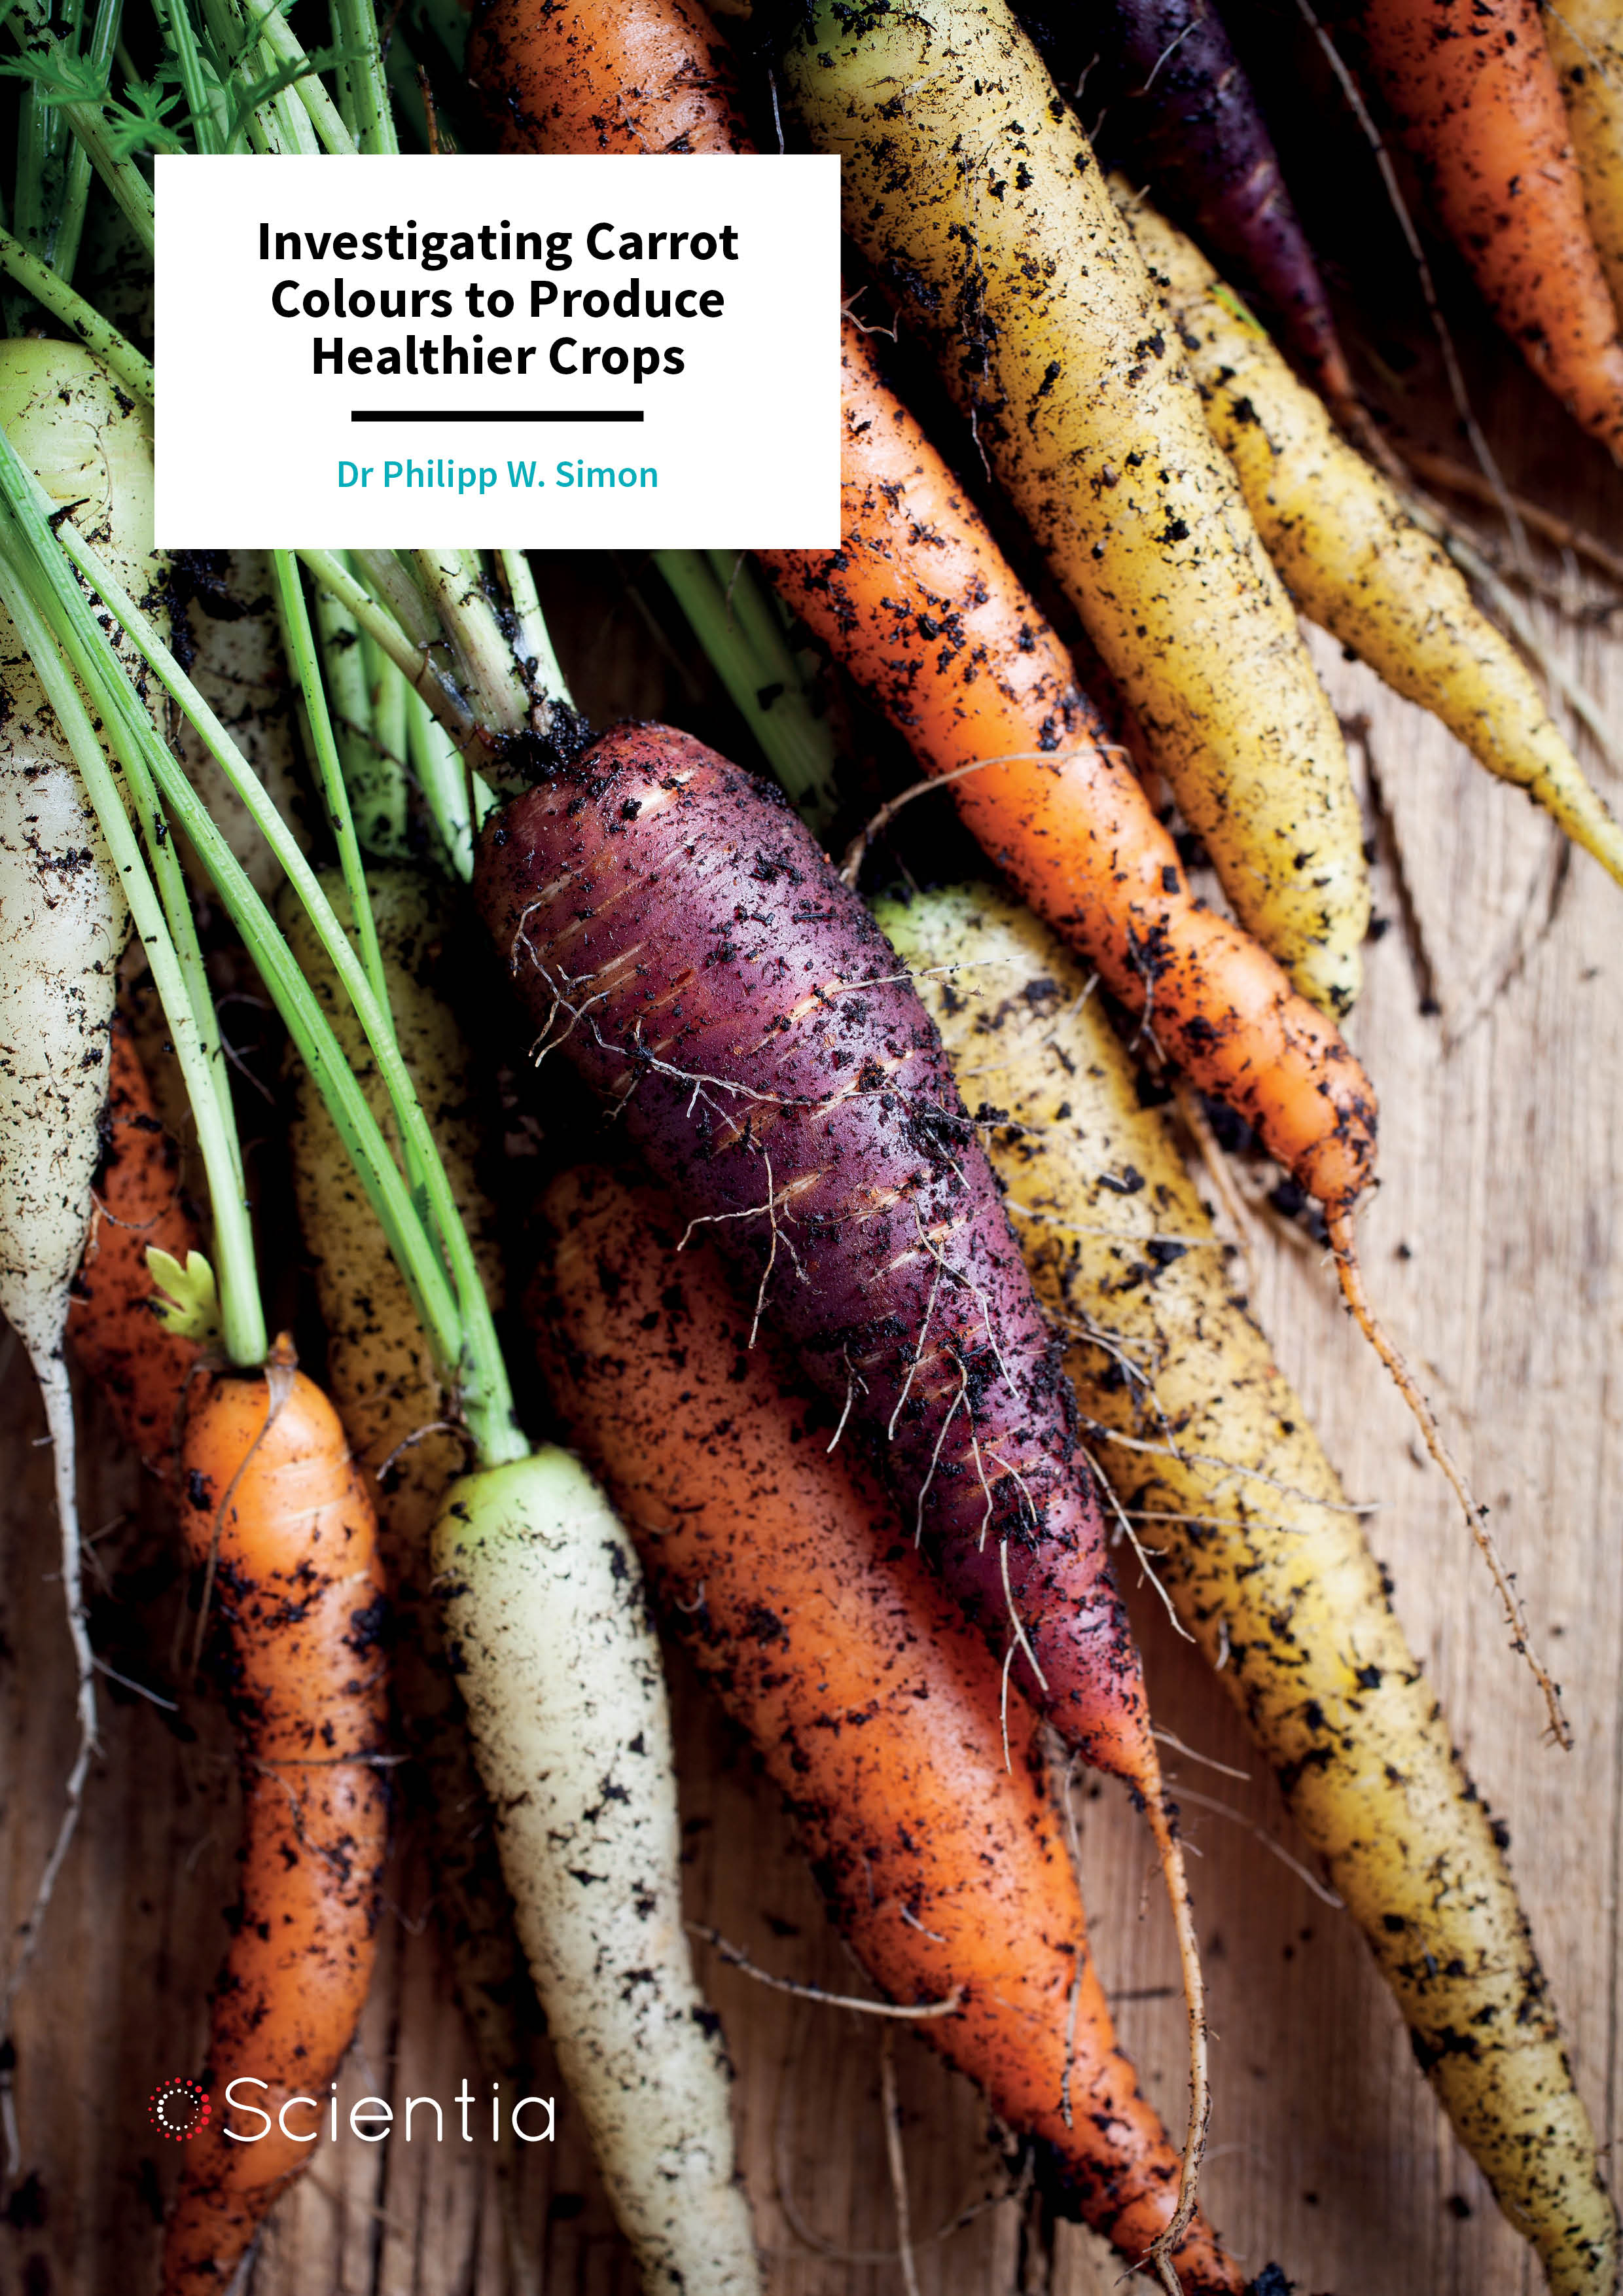 Dr Philipp Simon – Investigating Carrot Colours to Produce Healthier Crops